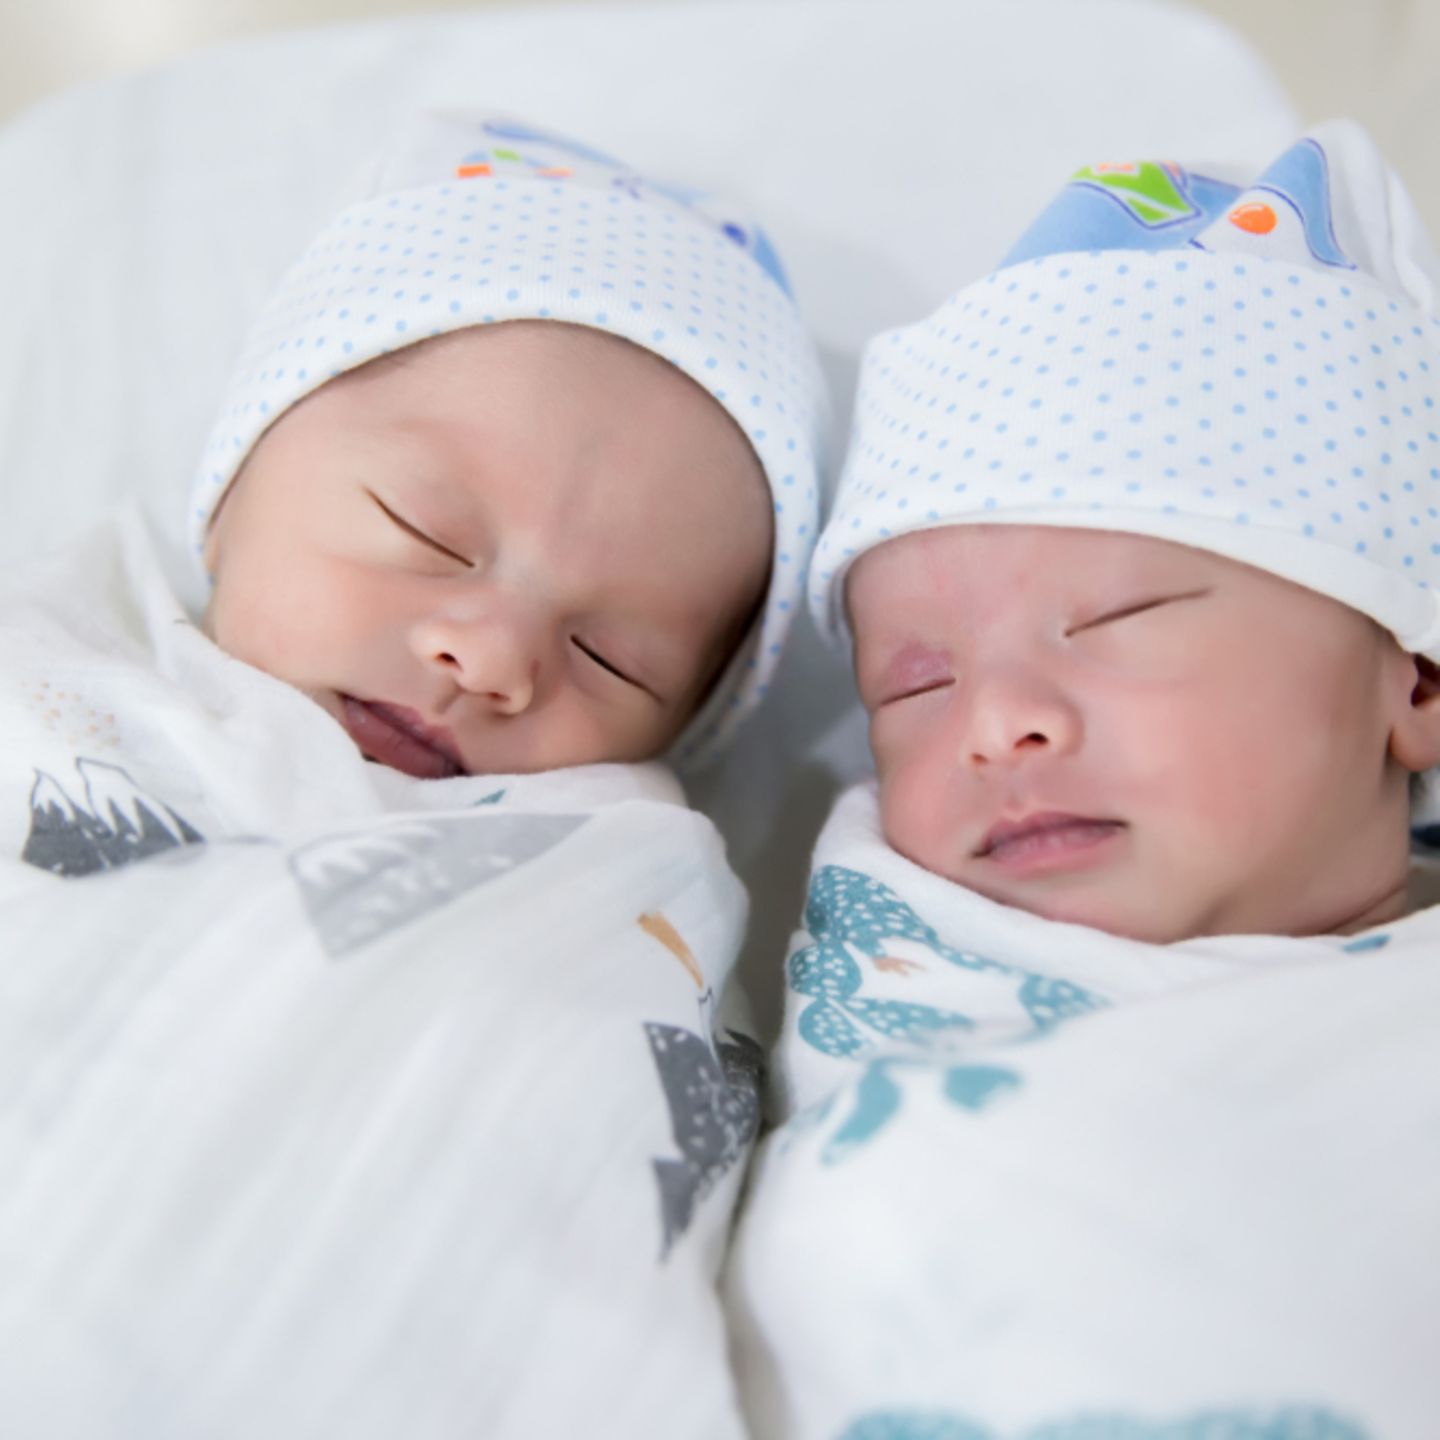 Twin birth: how a hug saves the life of one of the babies: photo of twins